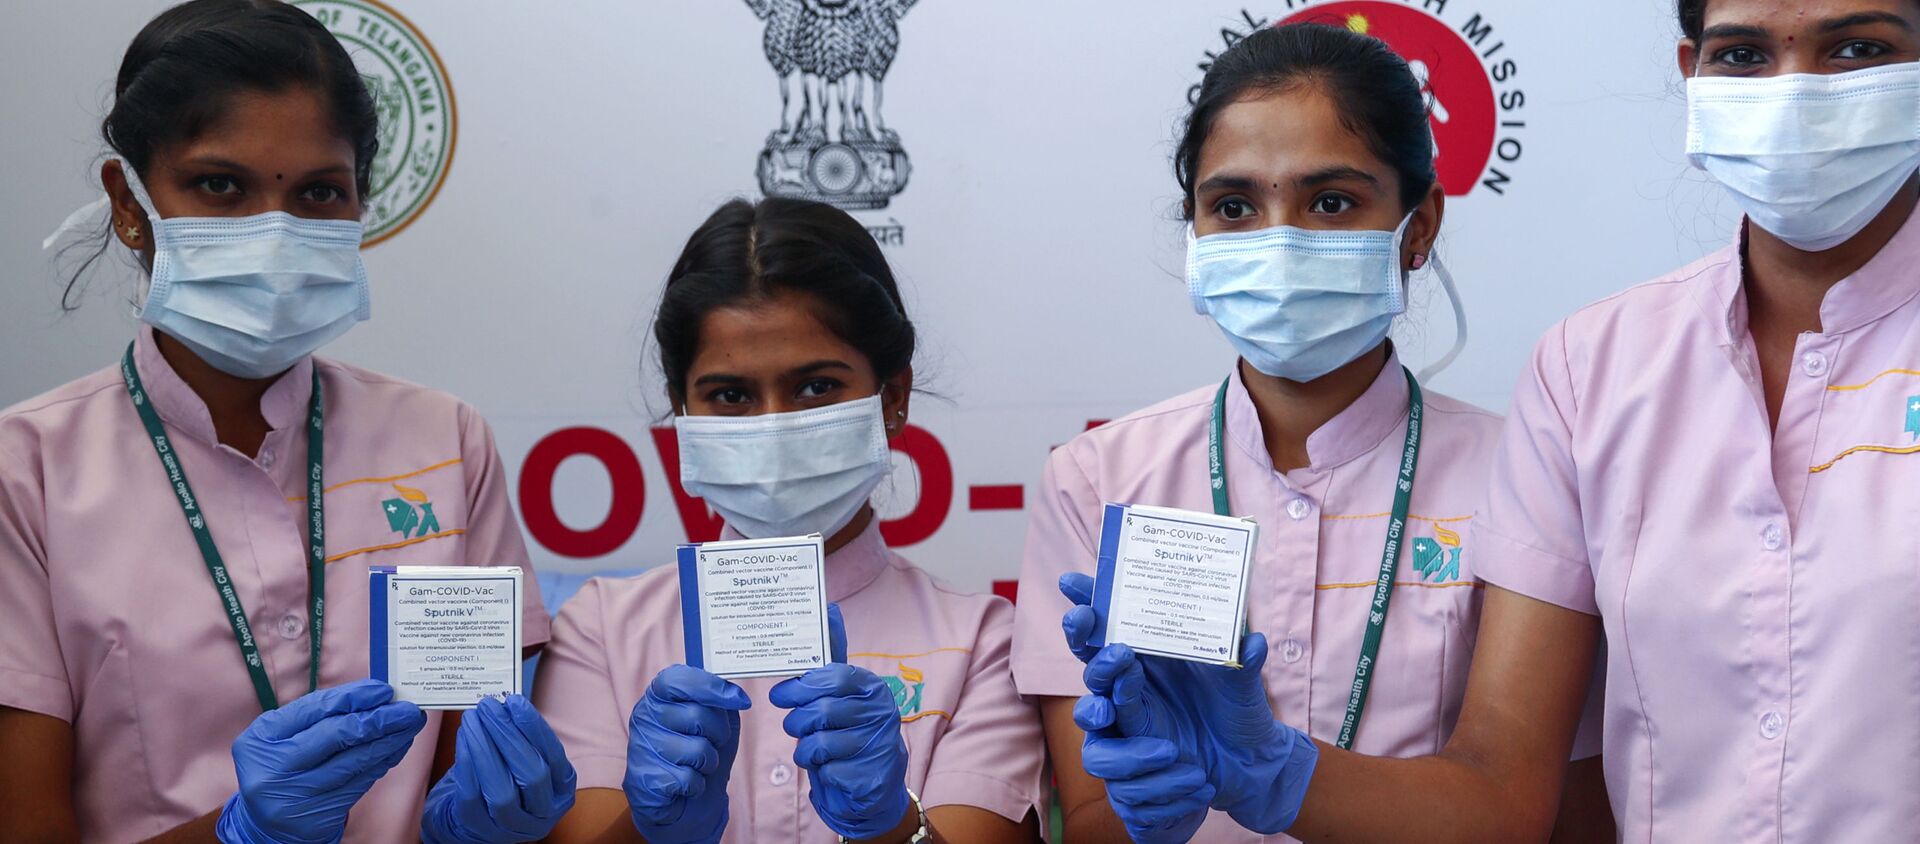 Indian nurses display for the media boxes containing the Sputnik V coronavirus vaccine during a soft launch of the Russian vaccine by inoculating employees and families of Dr Reddy’s Laboratories in Hyderabad, India, Monday, May 17, 2021 - Sputnik International, 1920